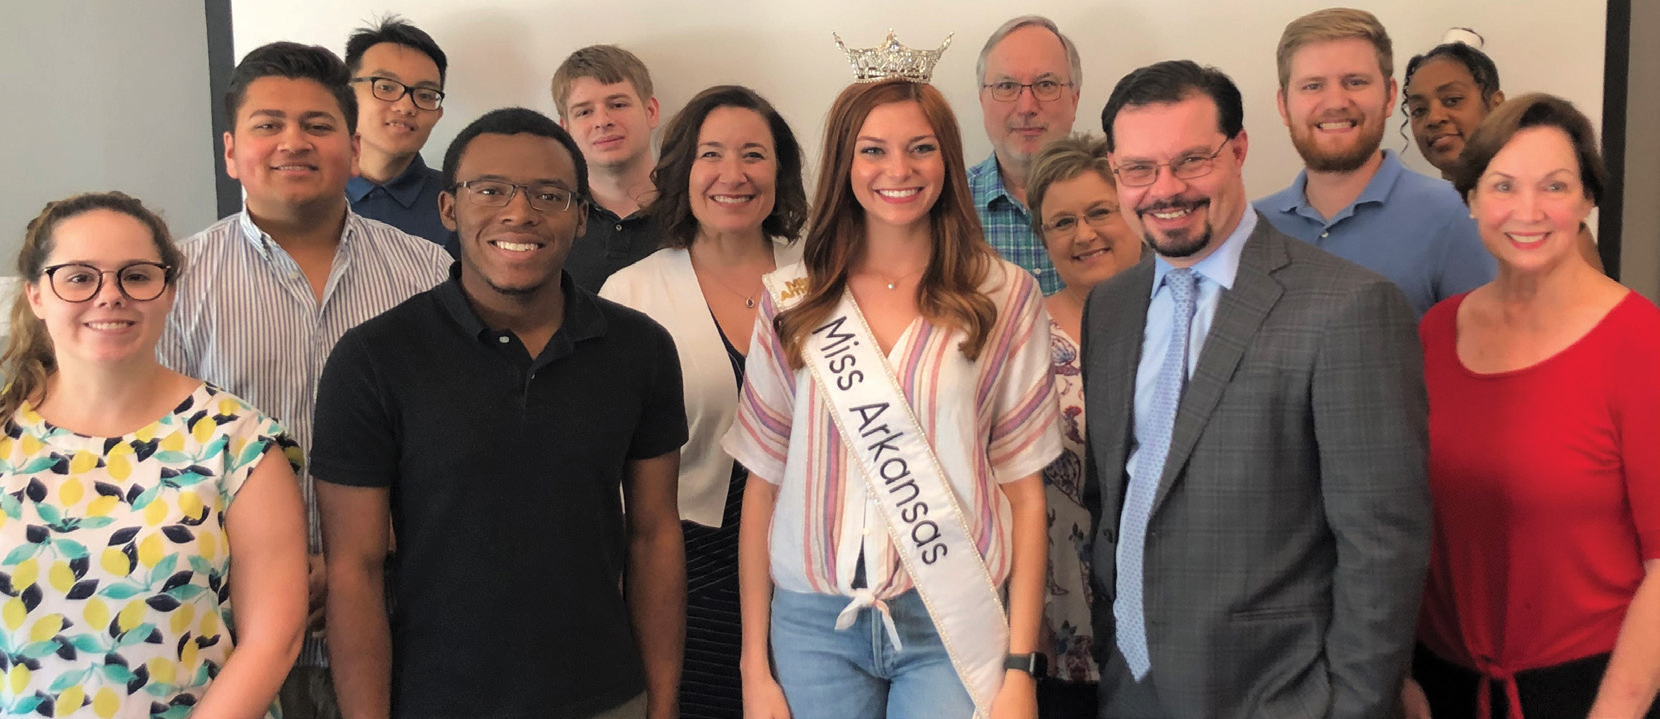 Our staff with Miss Arkansas 2019